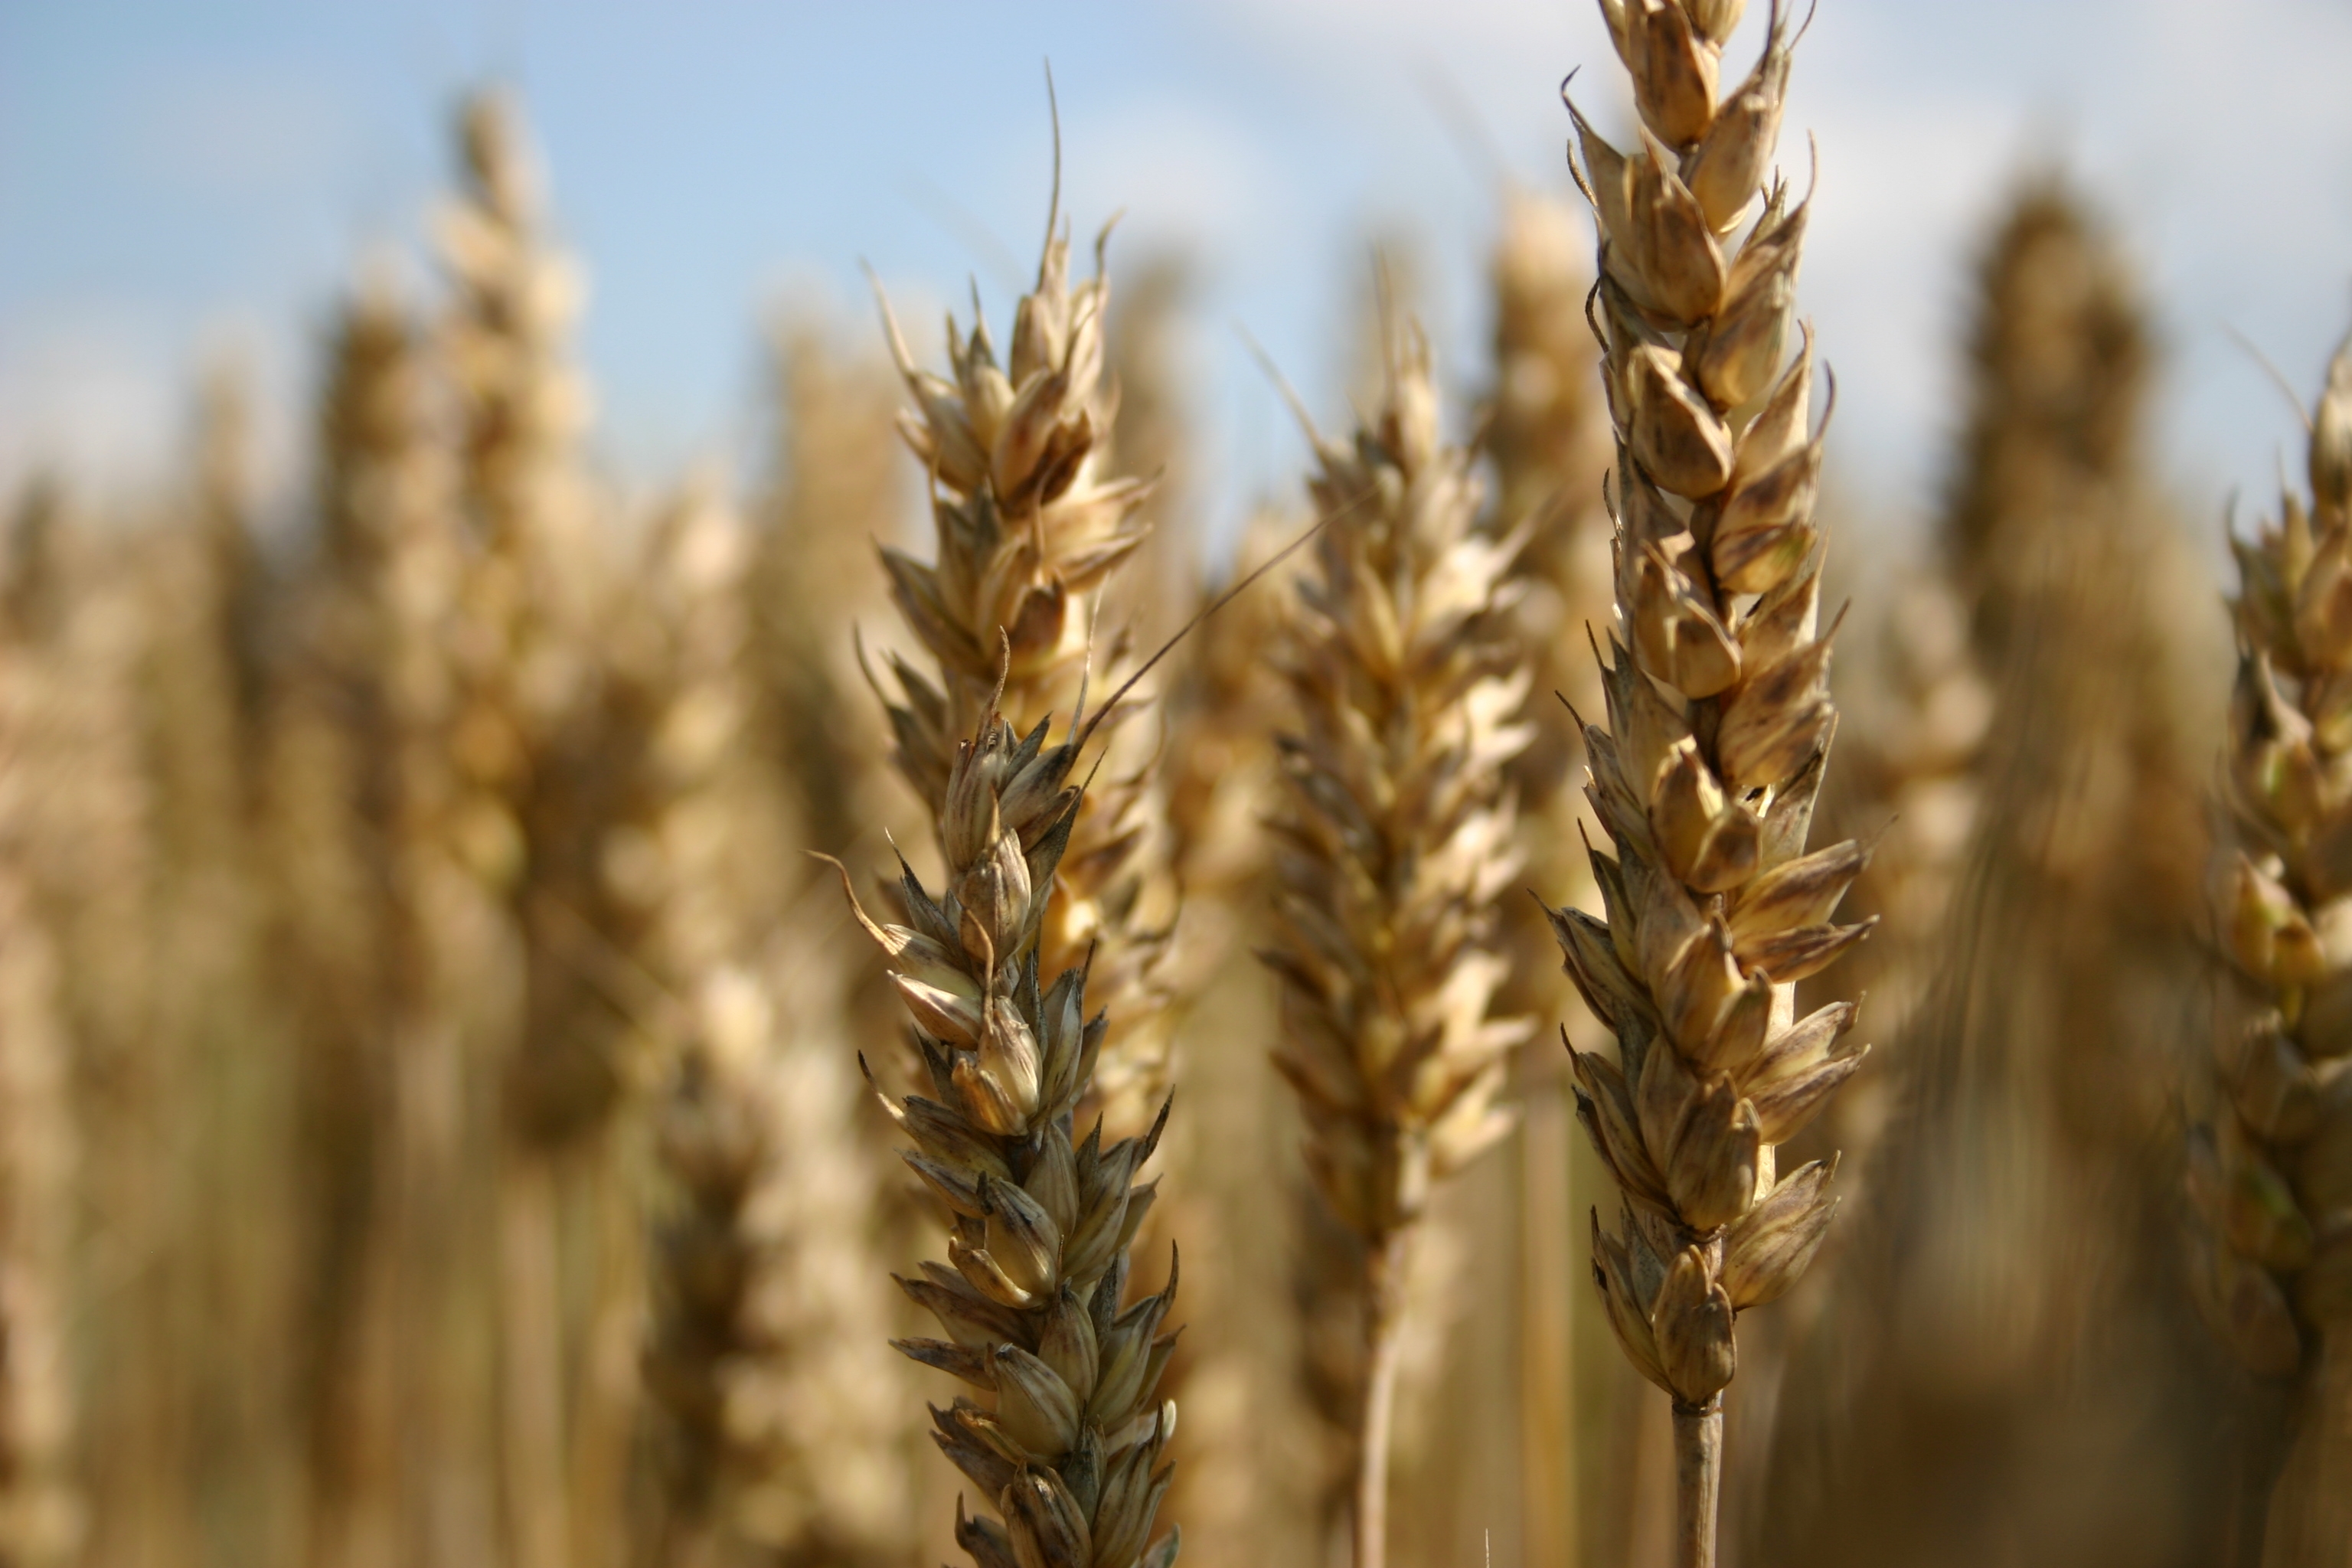 Danish wheat must be made more resilient